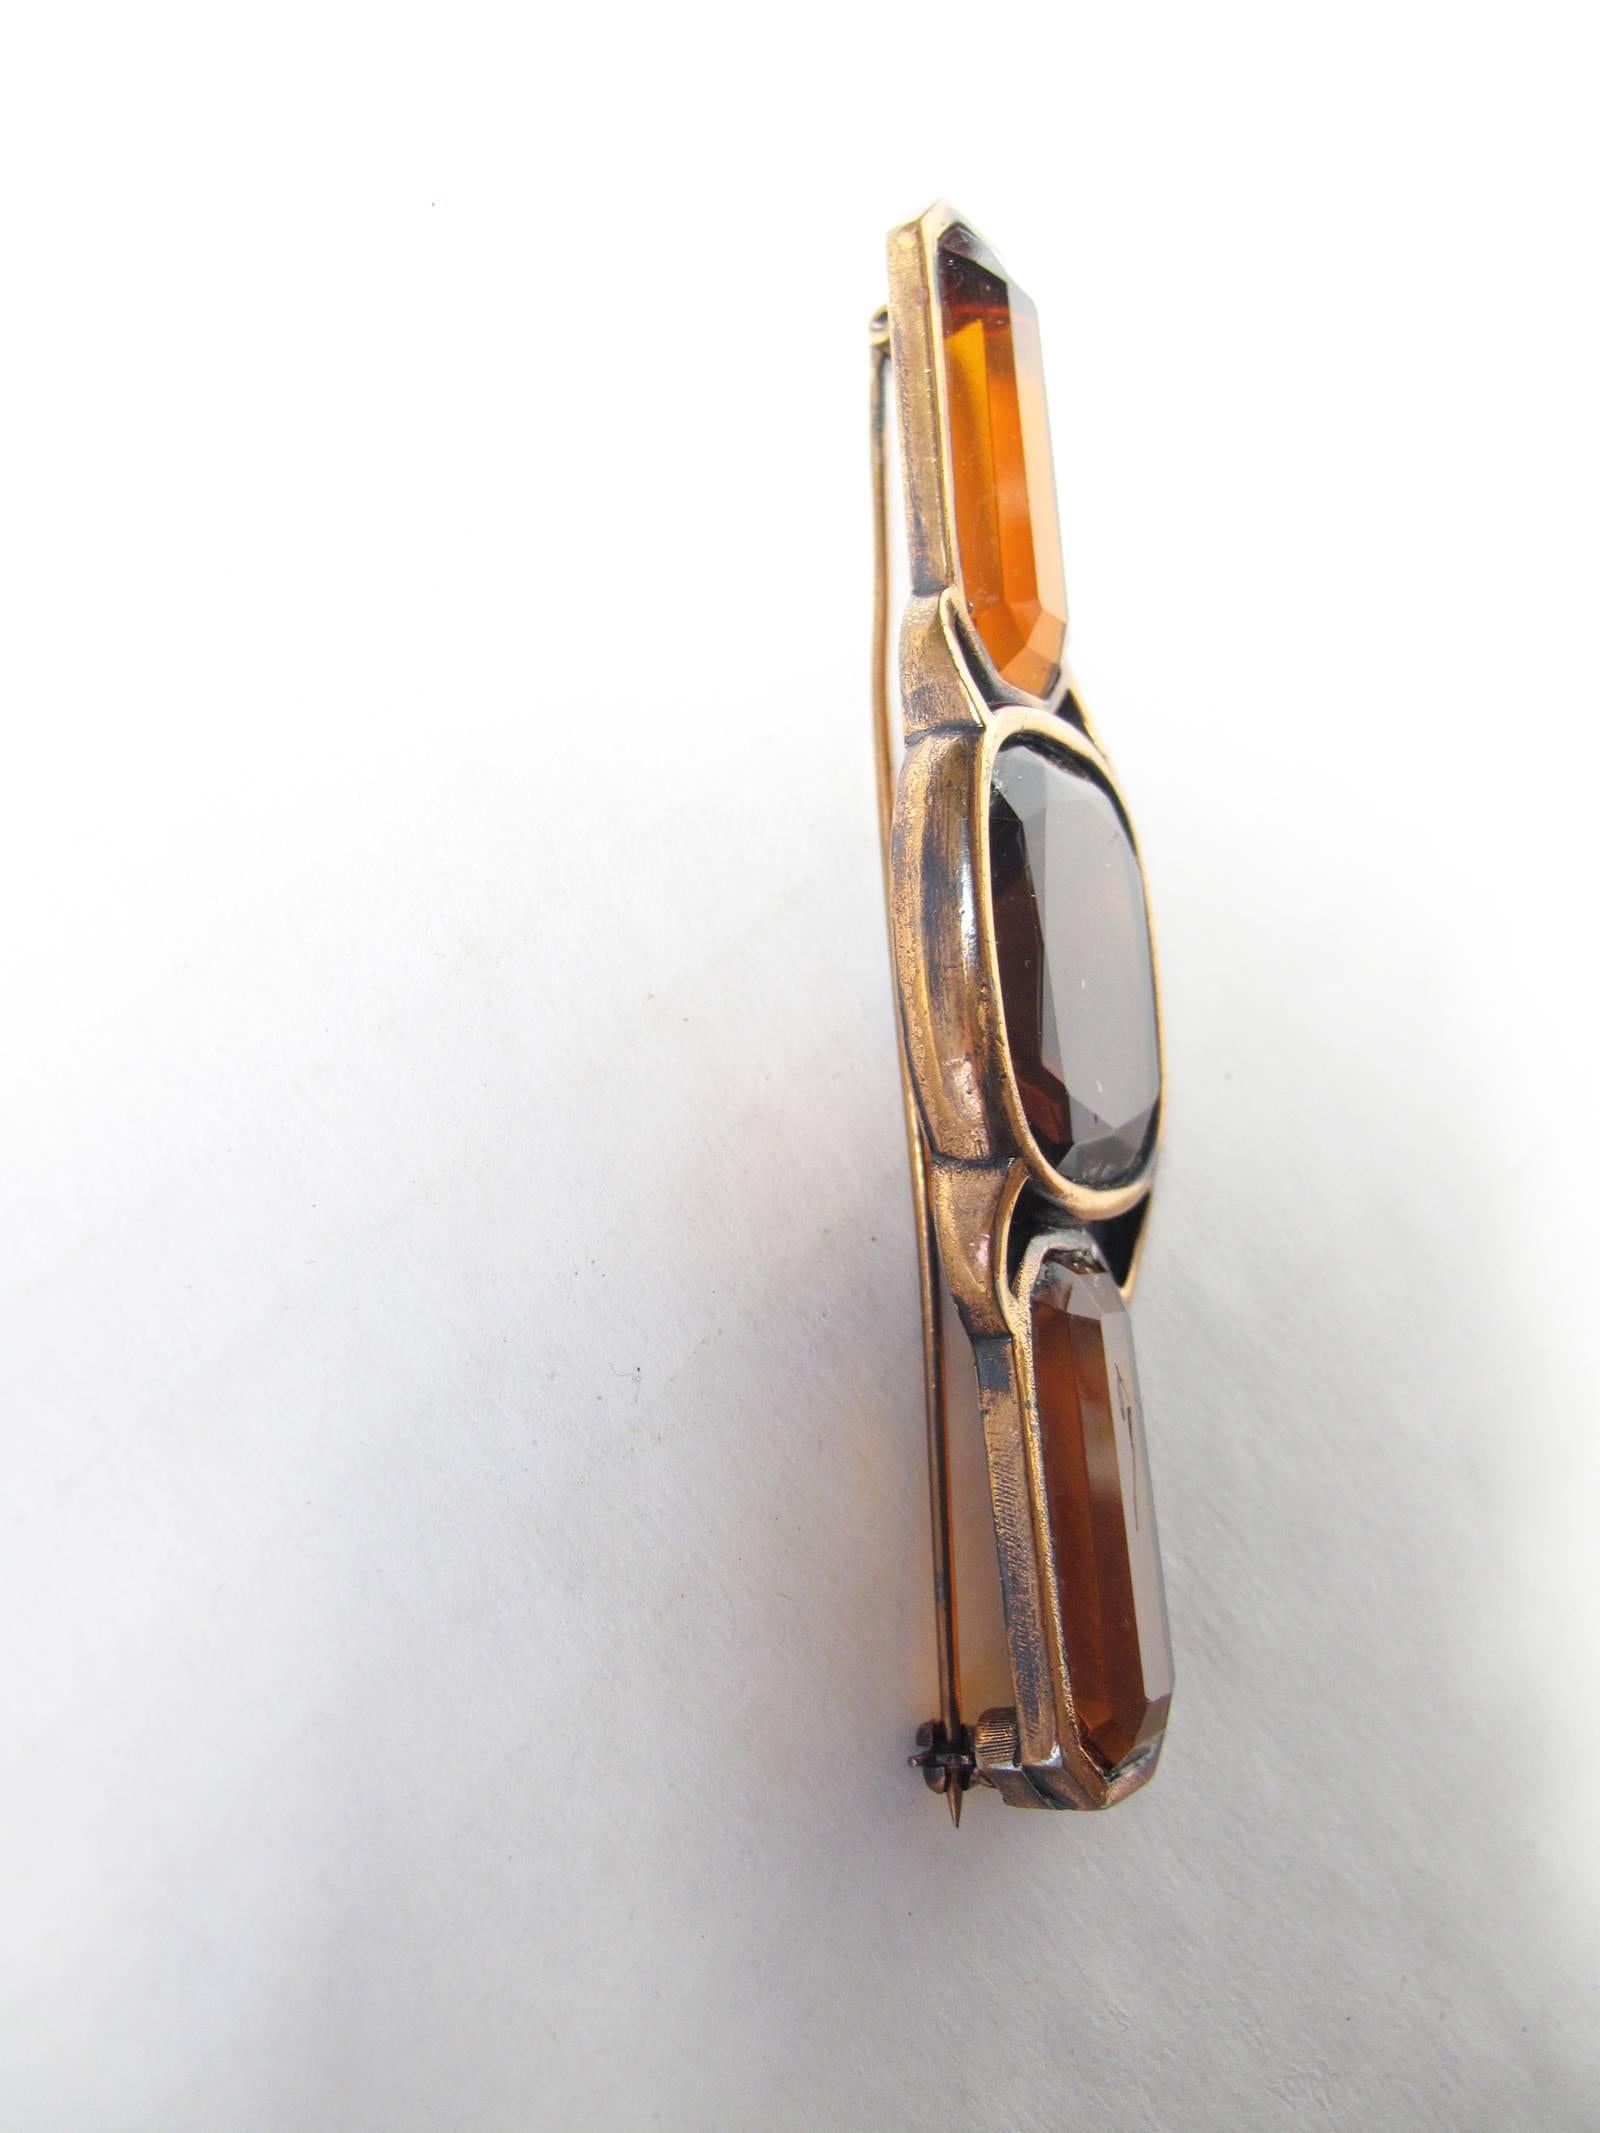 1980s Yves Saint Laurent copper and glass brooch.  Condition: Good, some wear to copper and scratch on glass. 
We accept returns for refund, please see our terms.  We offer free ground shipping within the US. 